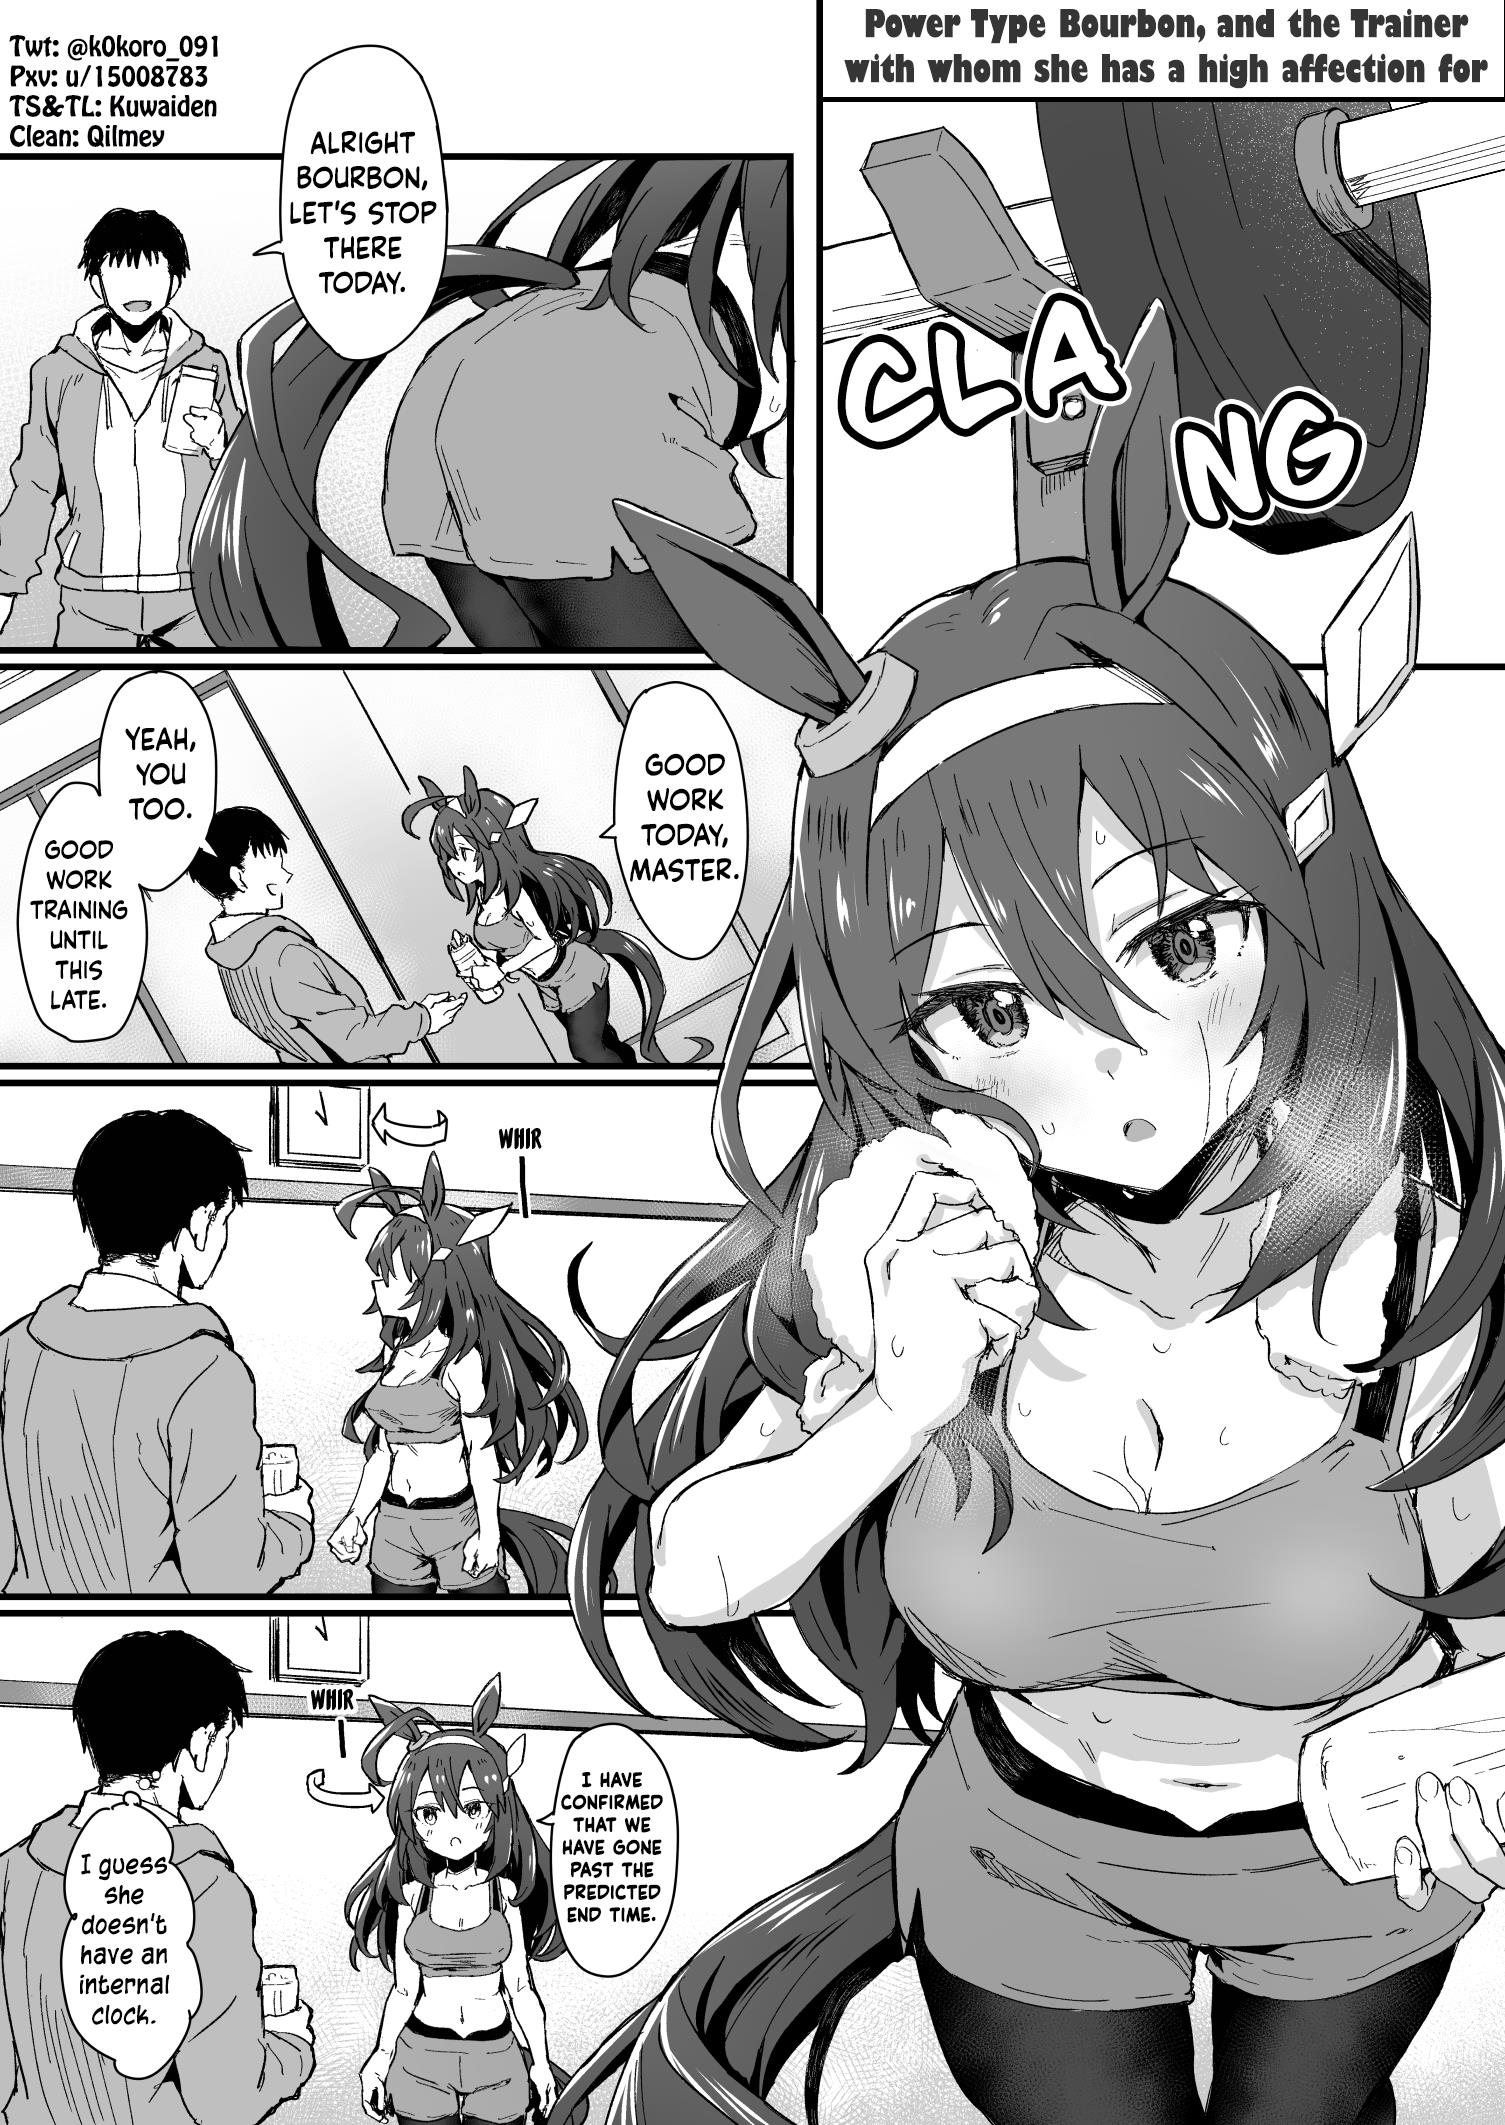 Kokoro-Sensei's Umamusume Shorts (Doujinshi) Chapter 11: Power Type Bourbon, And The Trainer With Whom She Has High Affection For - Picture 1